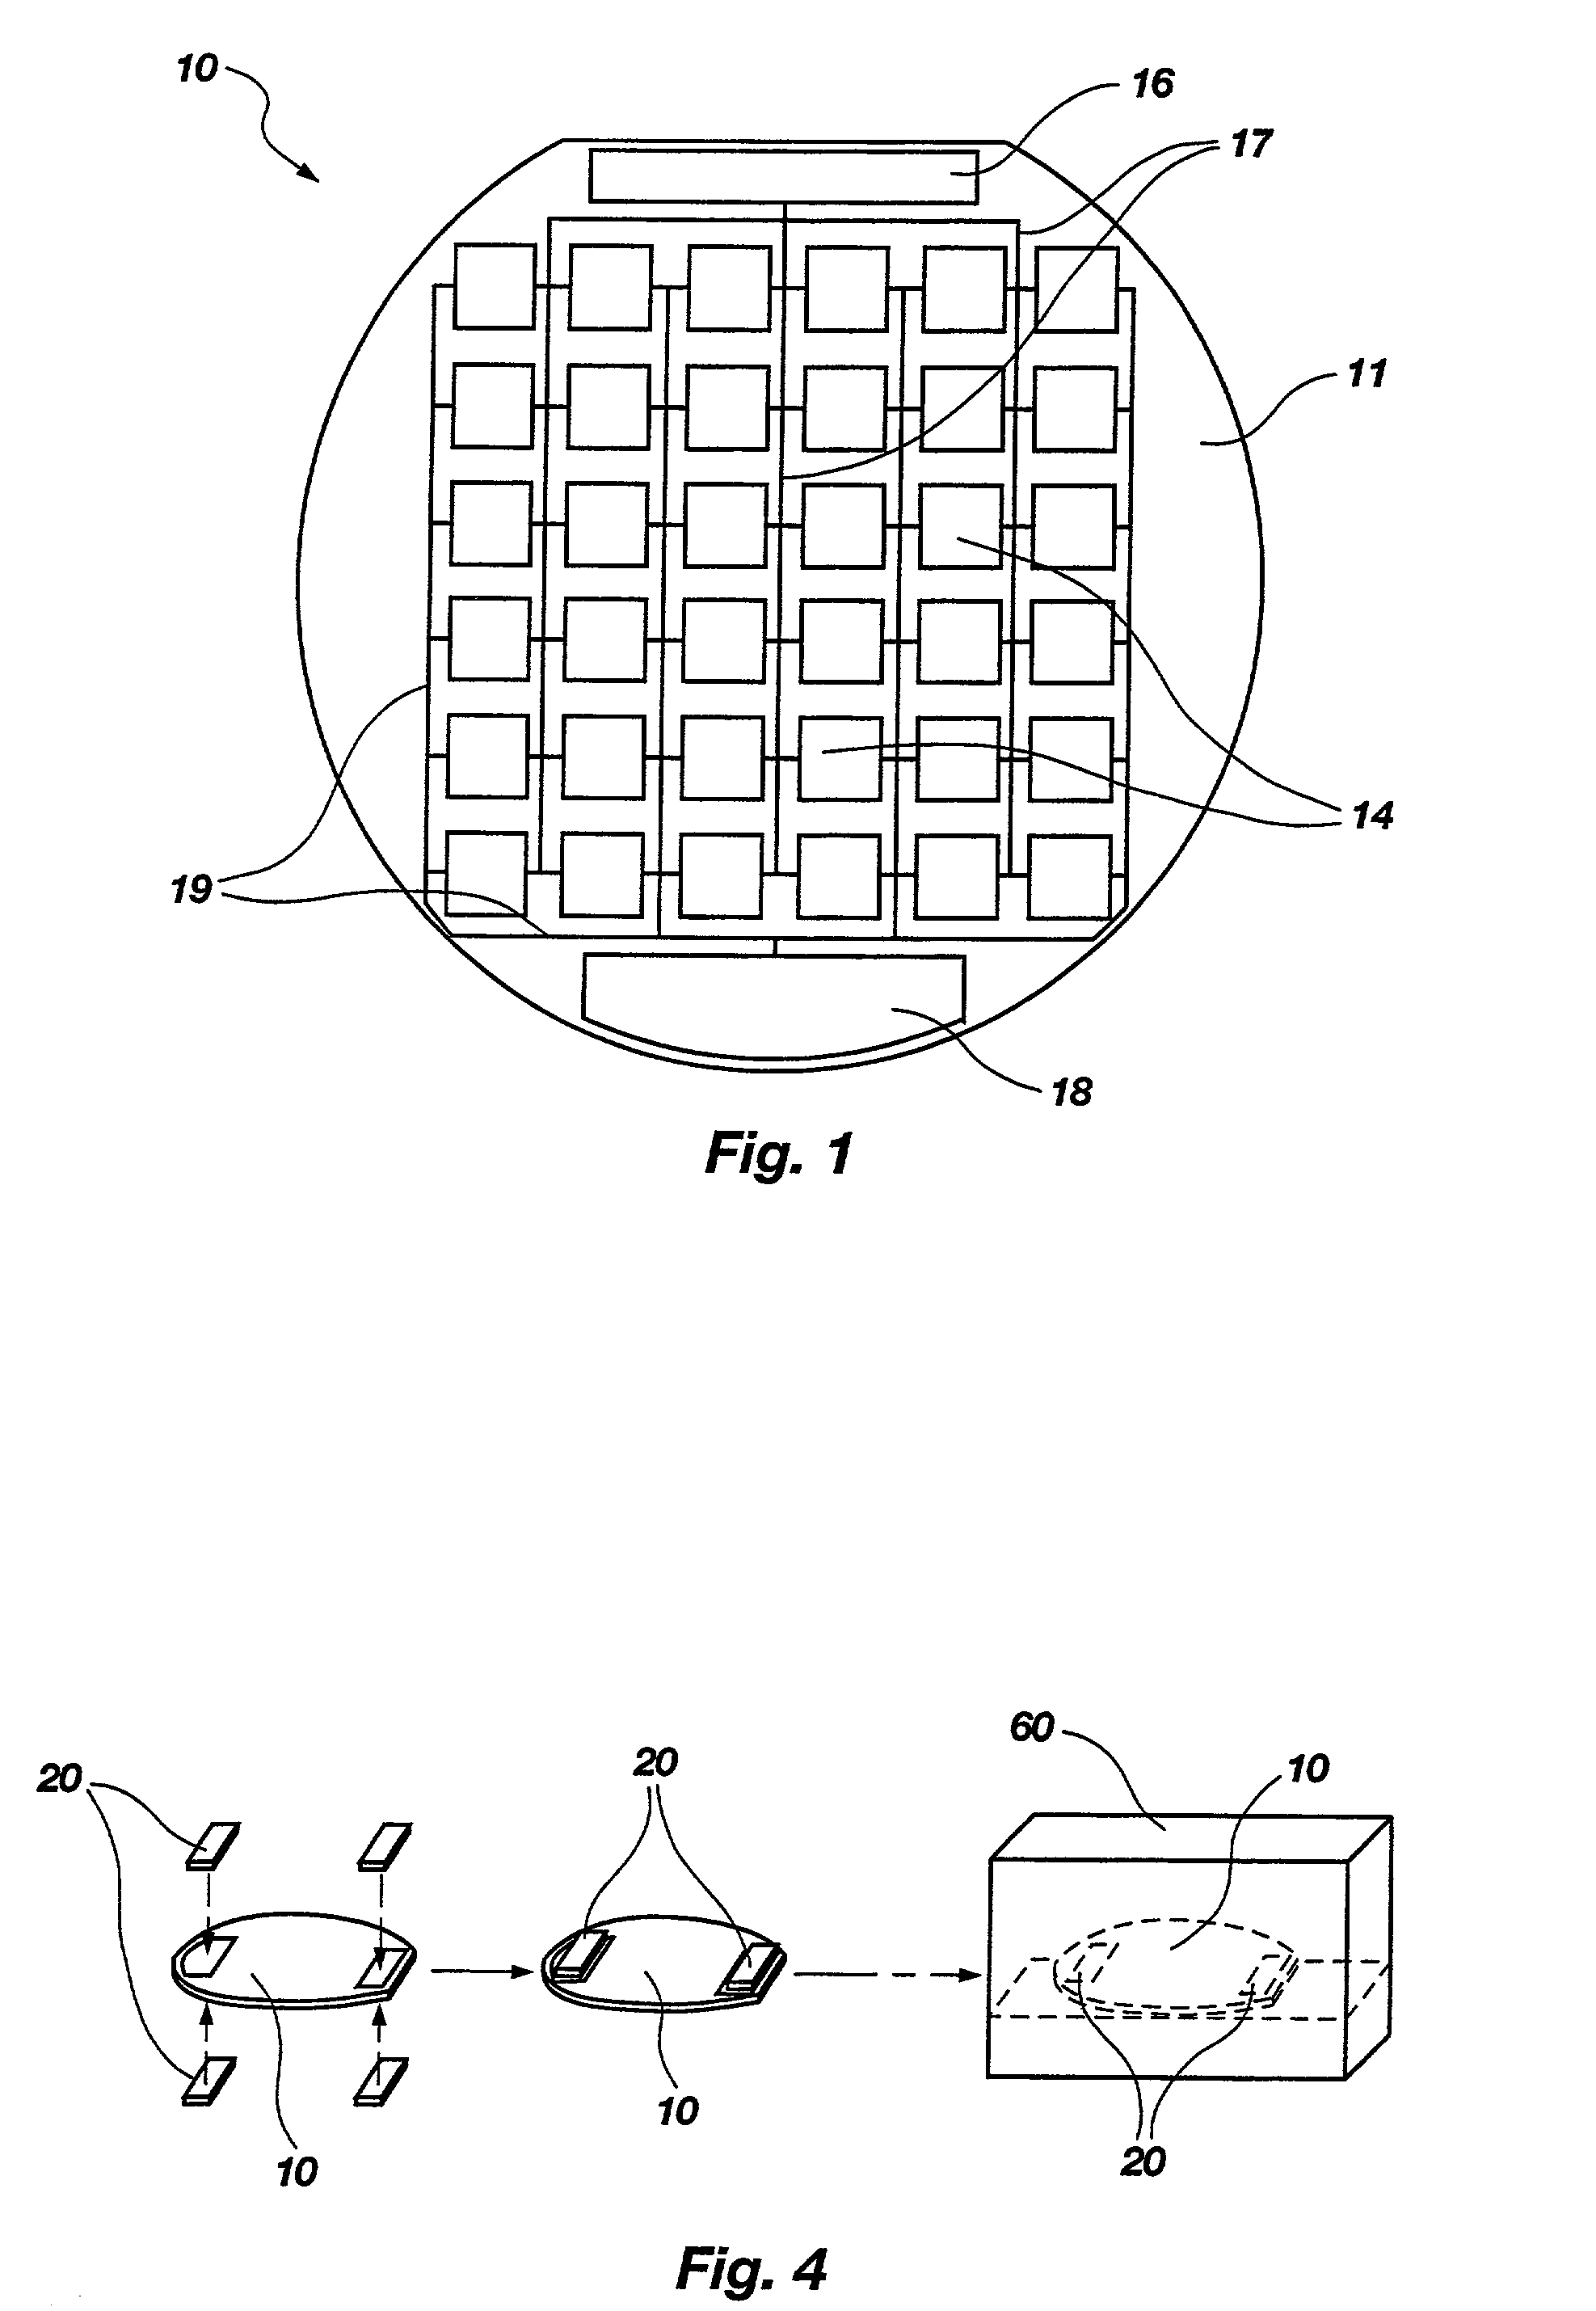 Methods for magnetically establishing an electrical connection with a contact of a semiconductor device component